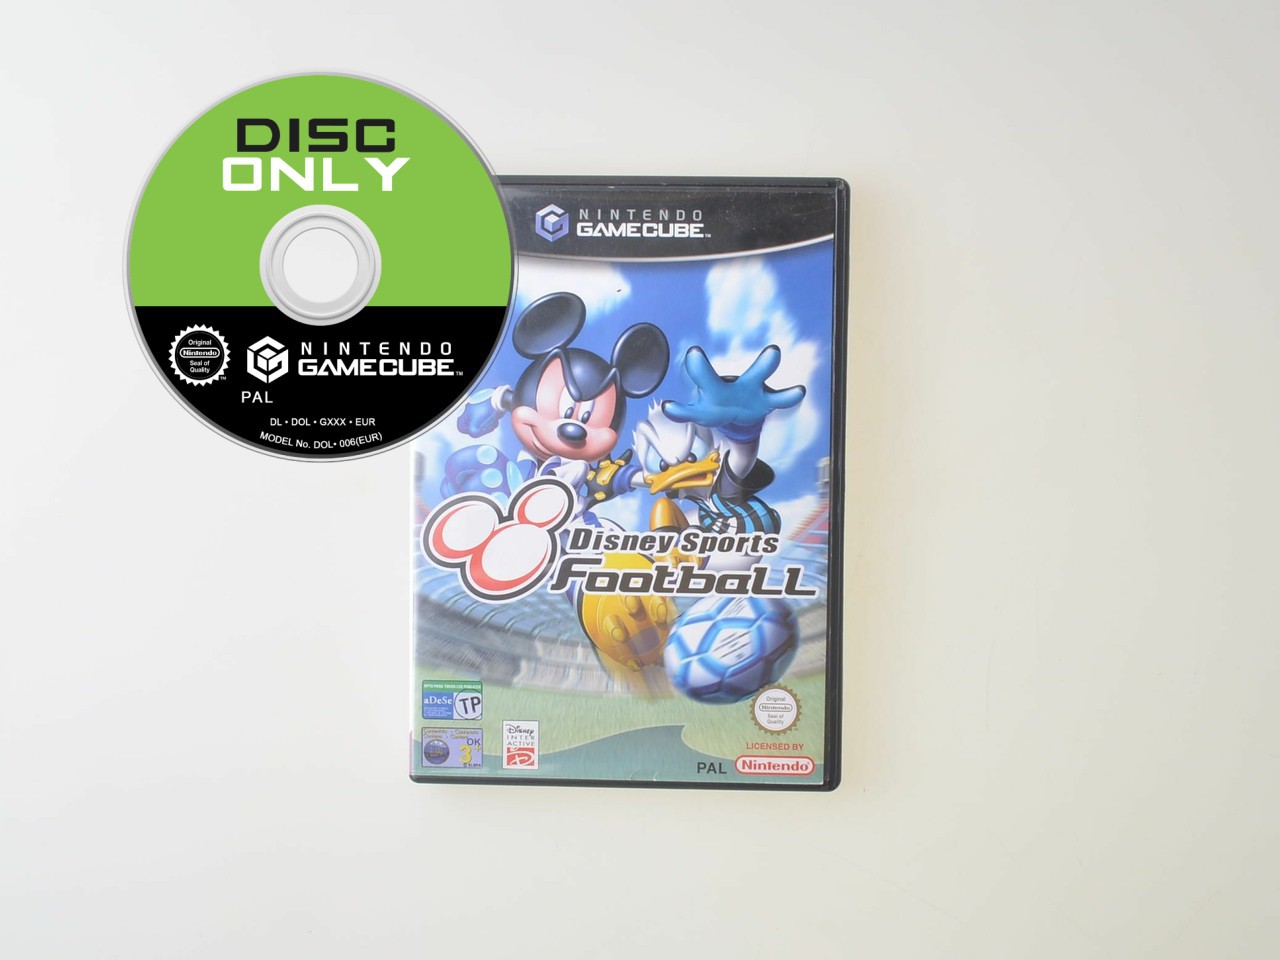 Disney Sports Football - Disc Only - Gamecube Games